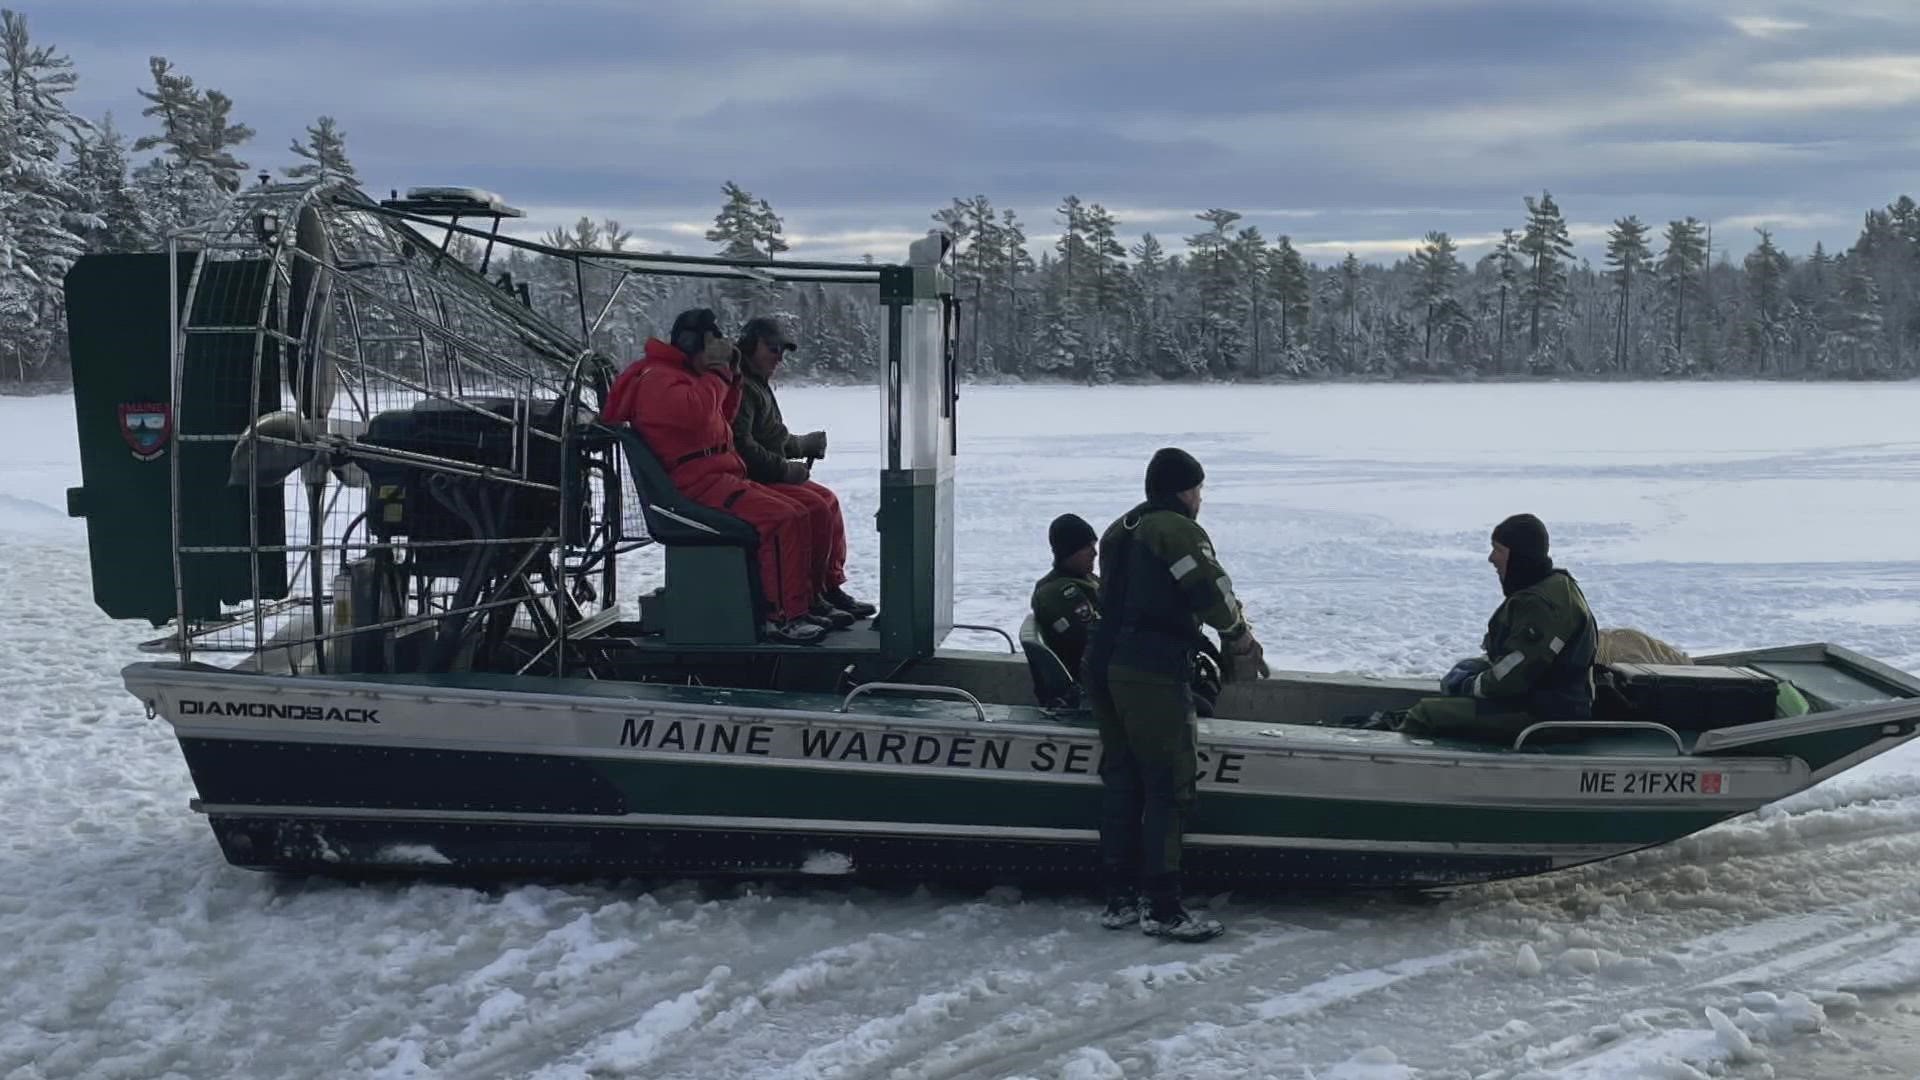 Allen Cole Jr., 74, of Bradford went through the ice on his snowmobile Friday afternoon looking for spots to ice fish. Wardens found his body Saturday morning.